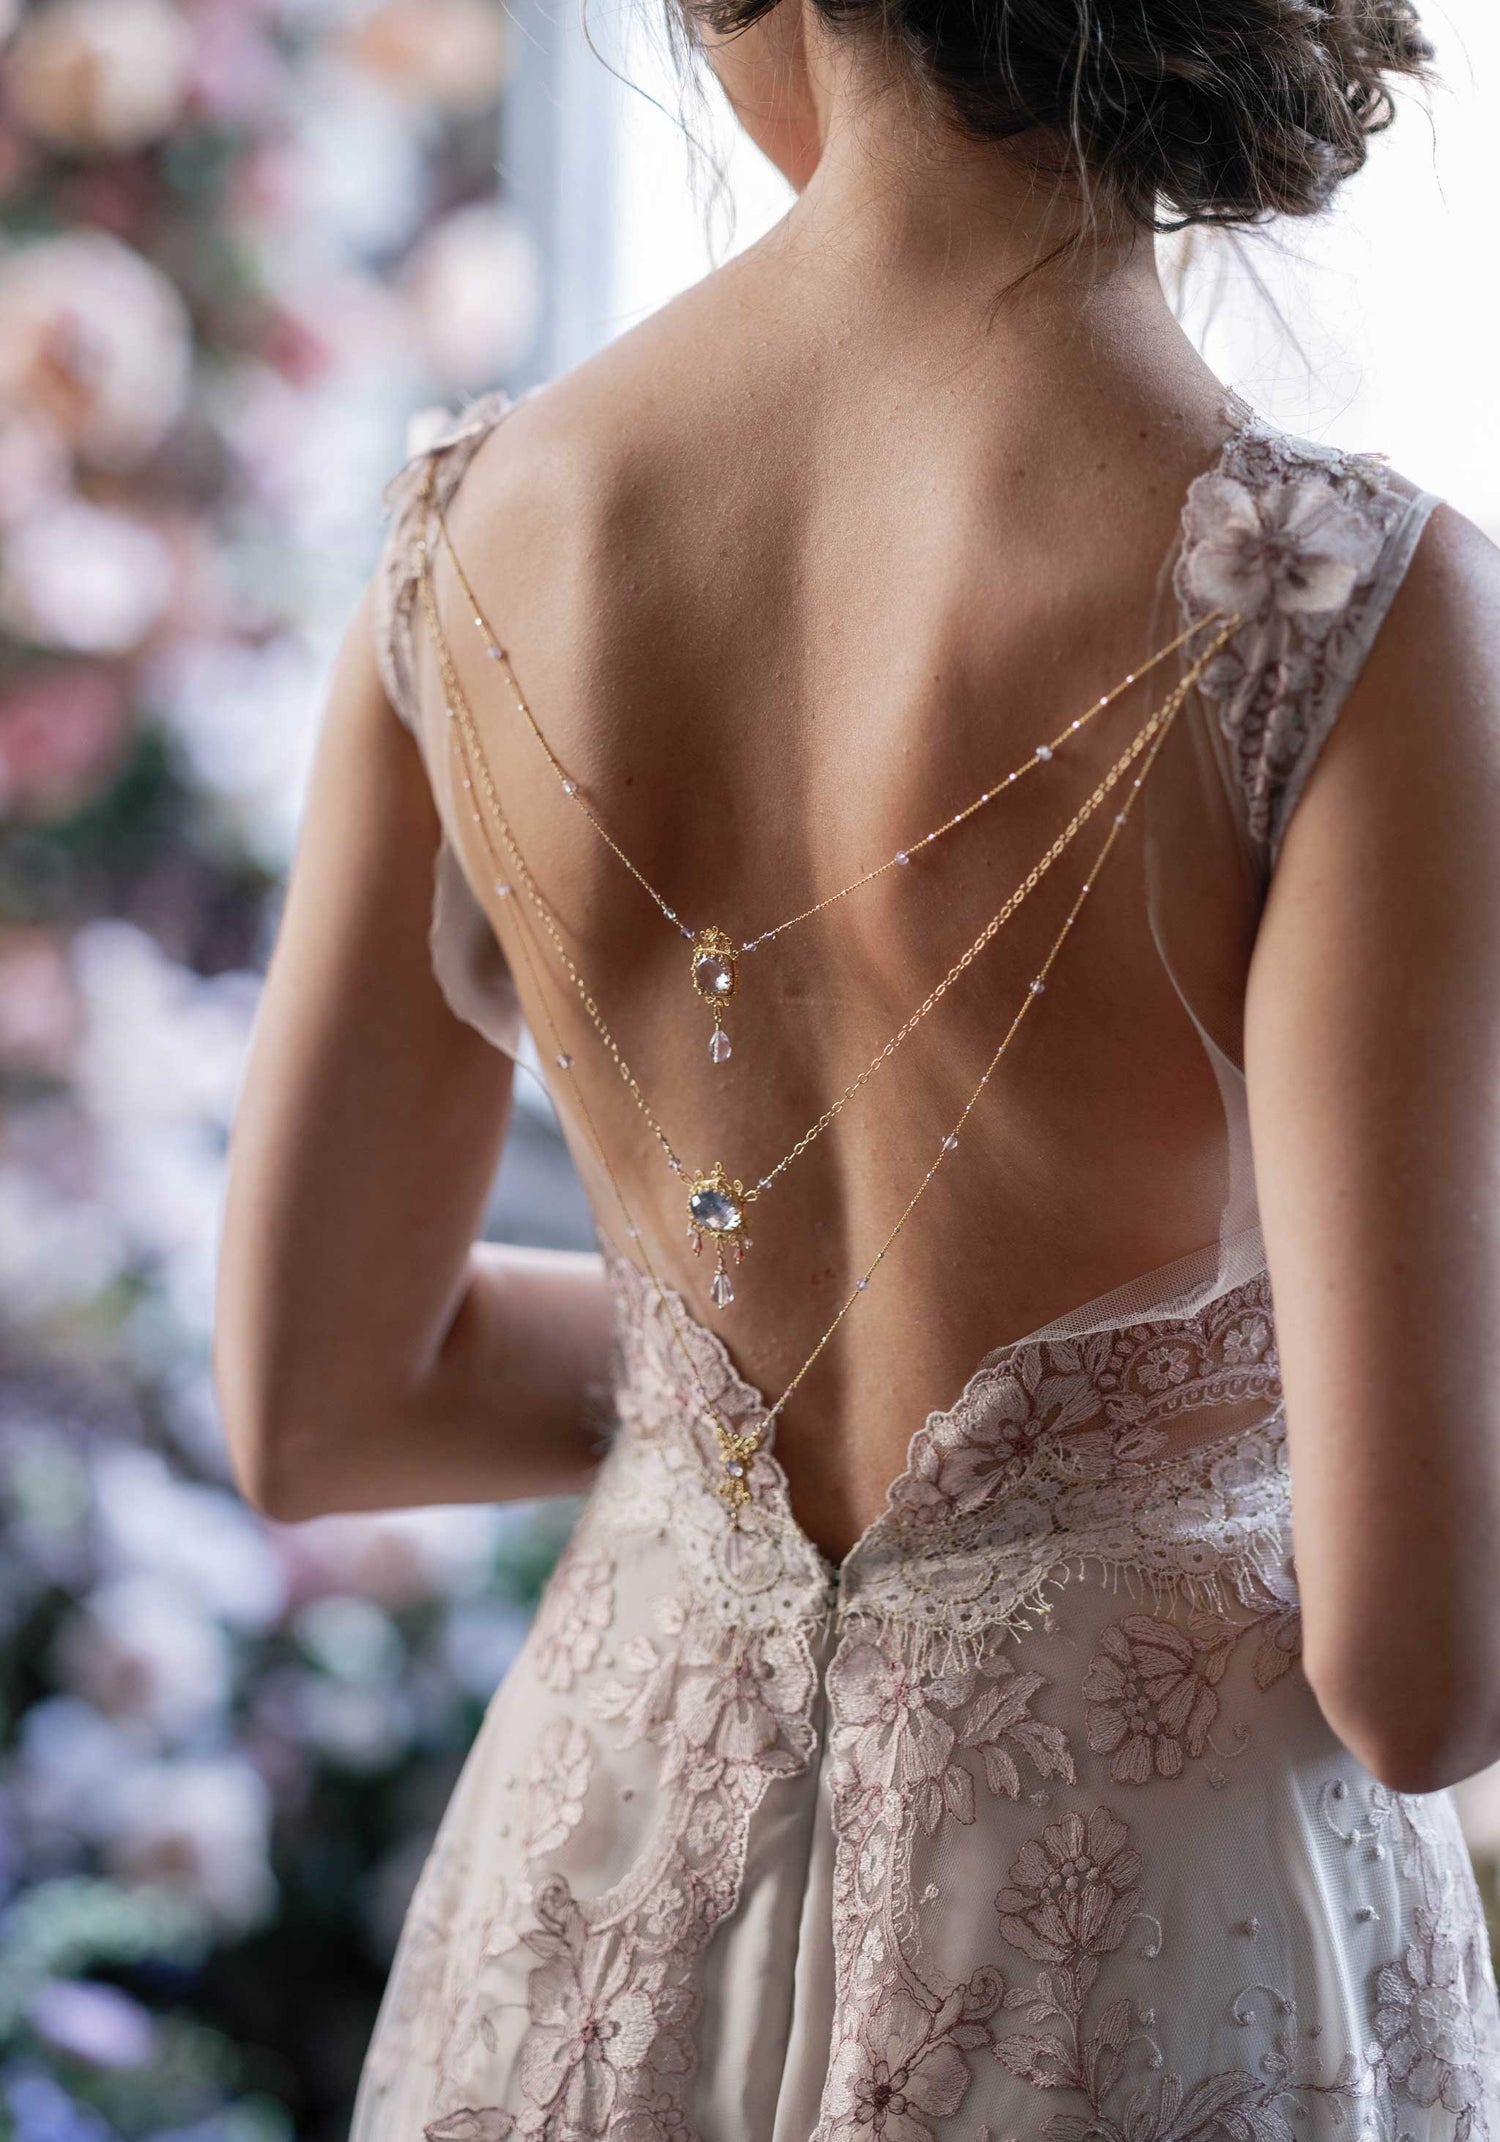 Open back wedding dress pair with Adorned neckless bridal accessory